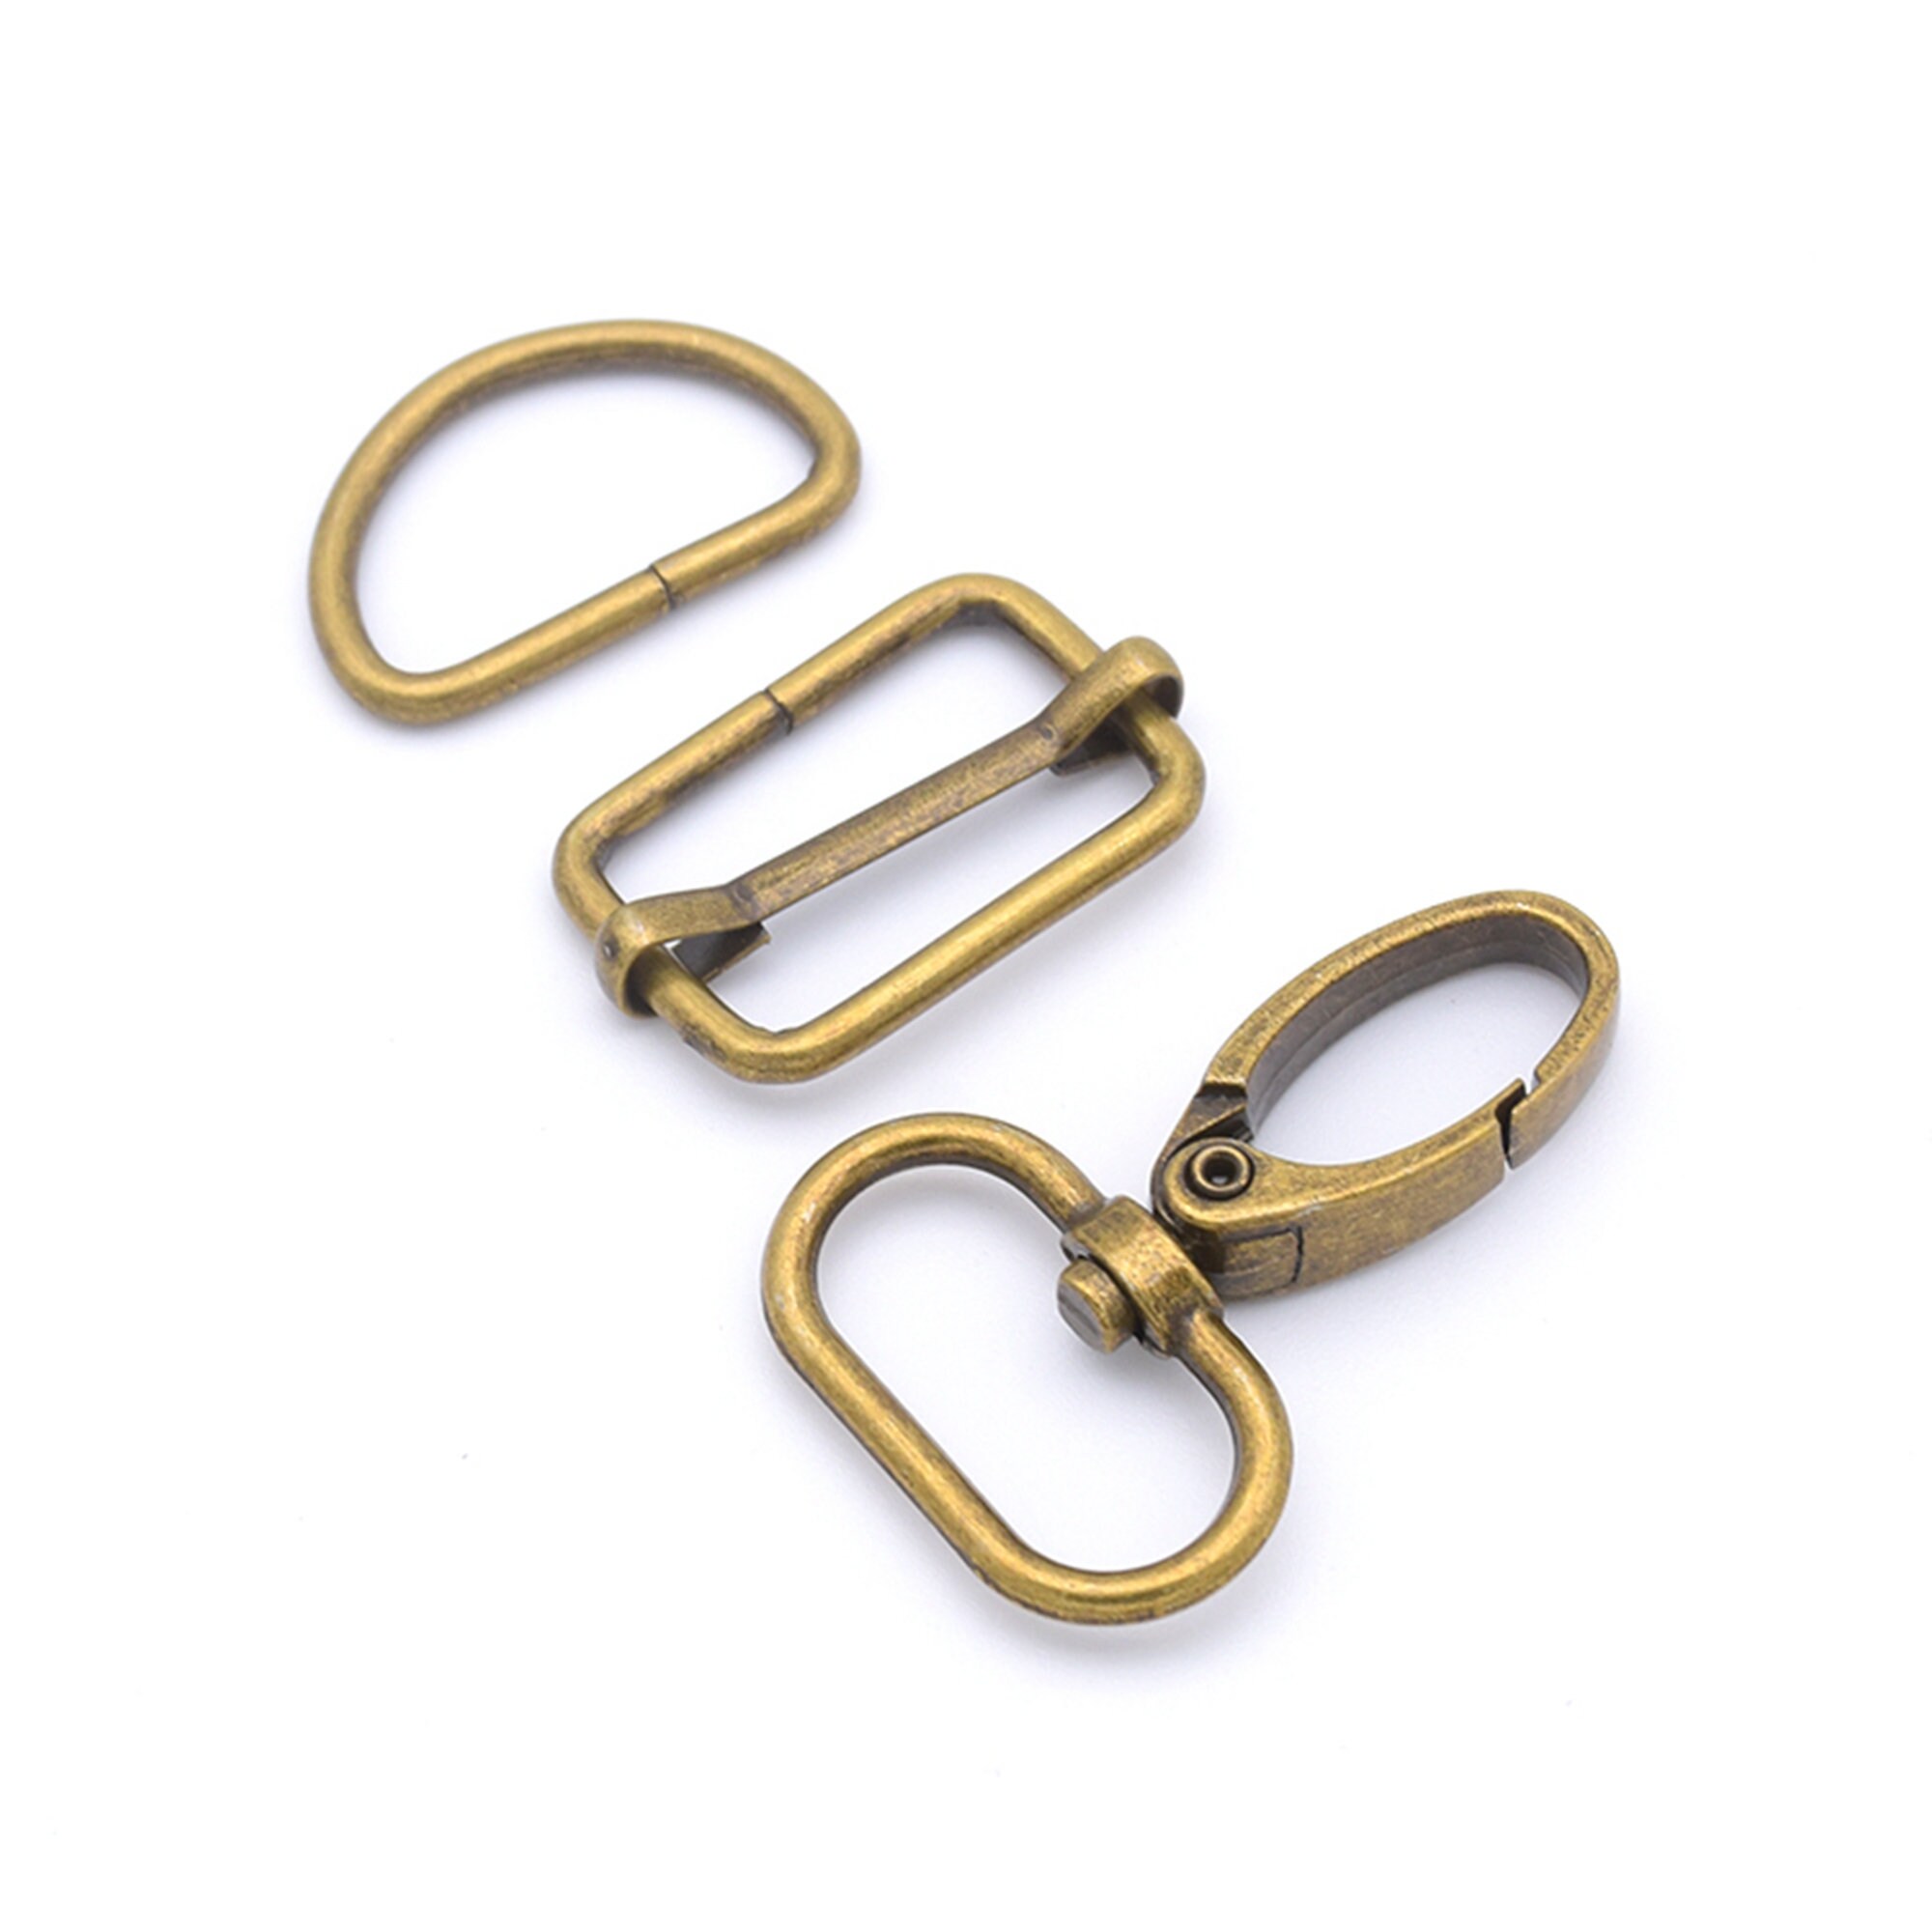 3/4 Inch, Antique Brass CRAFTMEMORE Swivel Trigger Snap Hooks Classic Lobster Clasps with D-Rings for Purse Strap Lanyard Leather Craft 10 Sets CSD1 